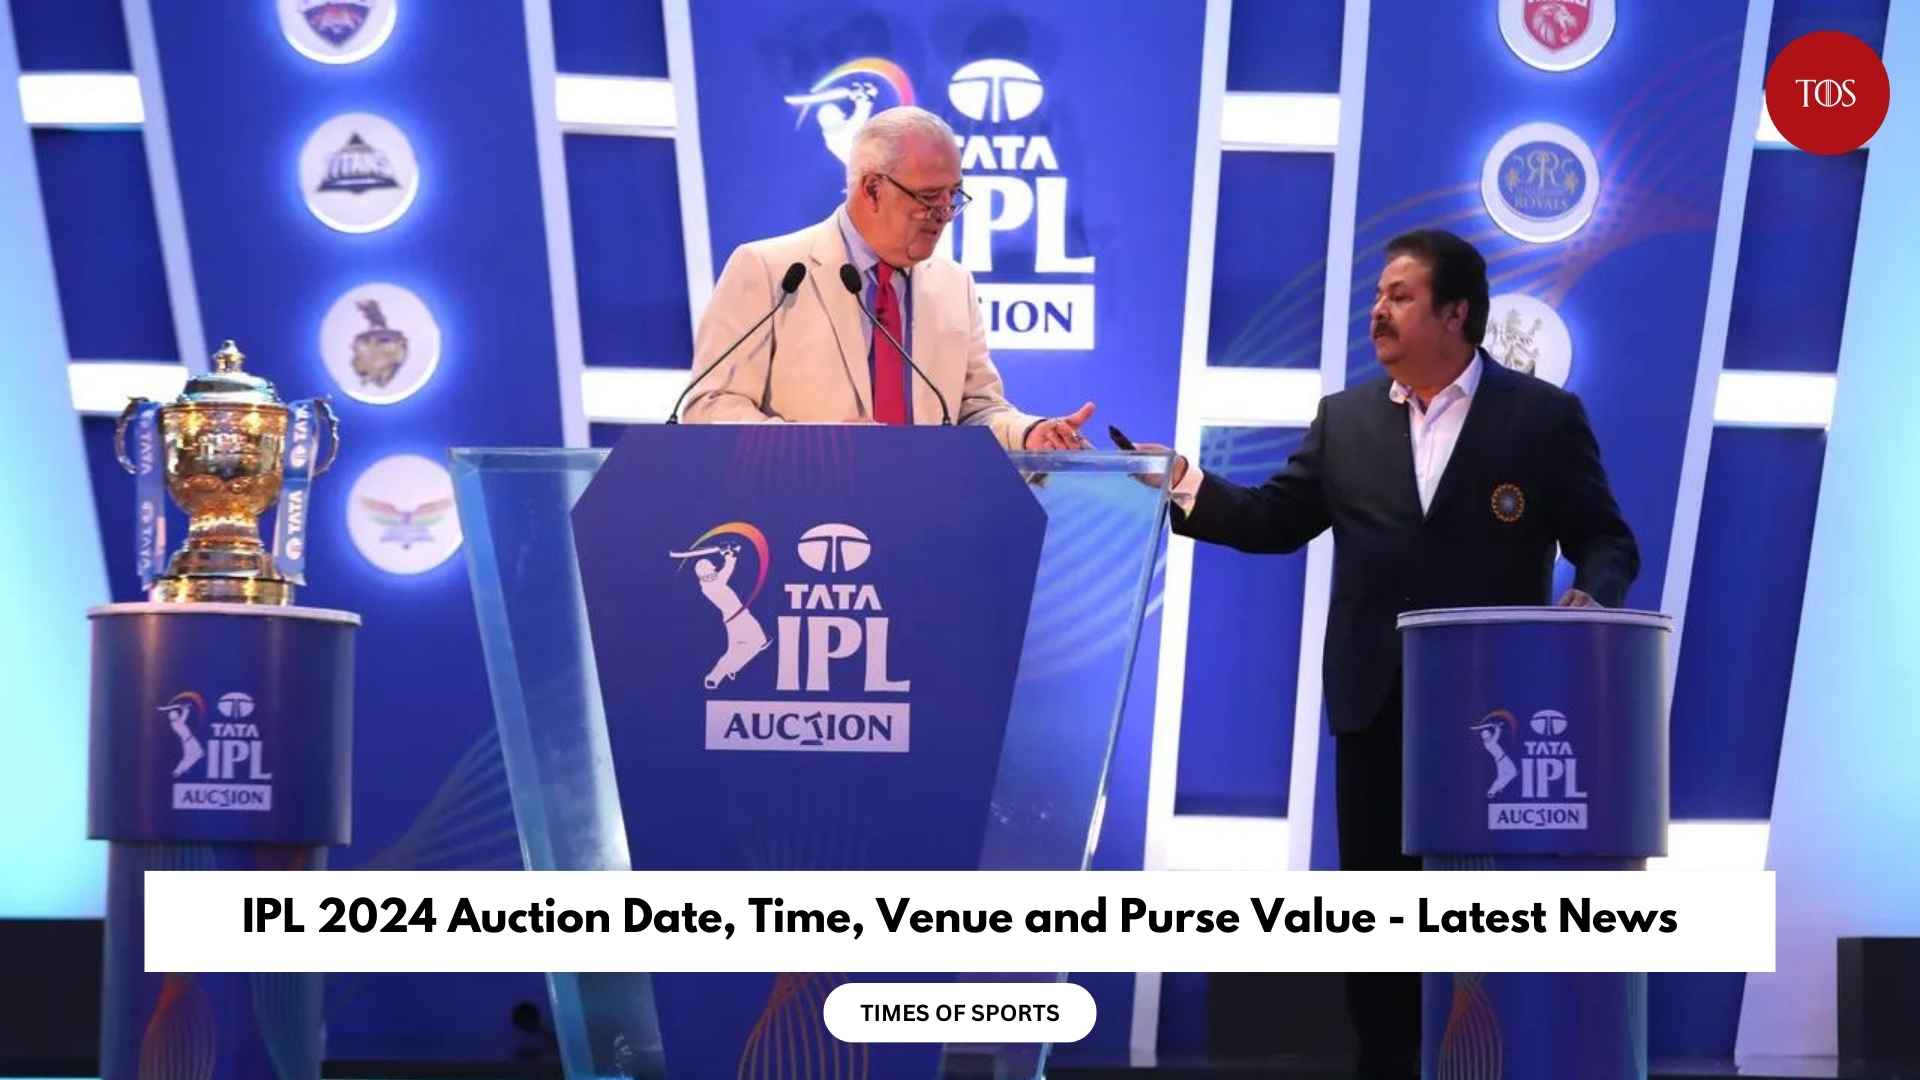 IPL 2024 Auction News, Place, Date, Rules, 10 Team Players